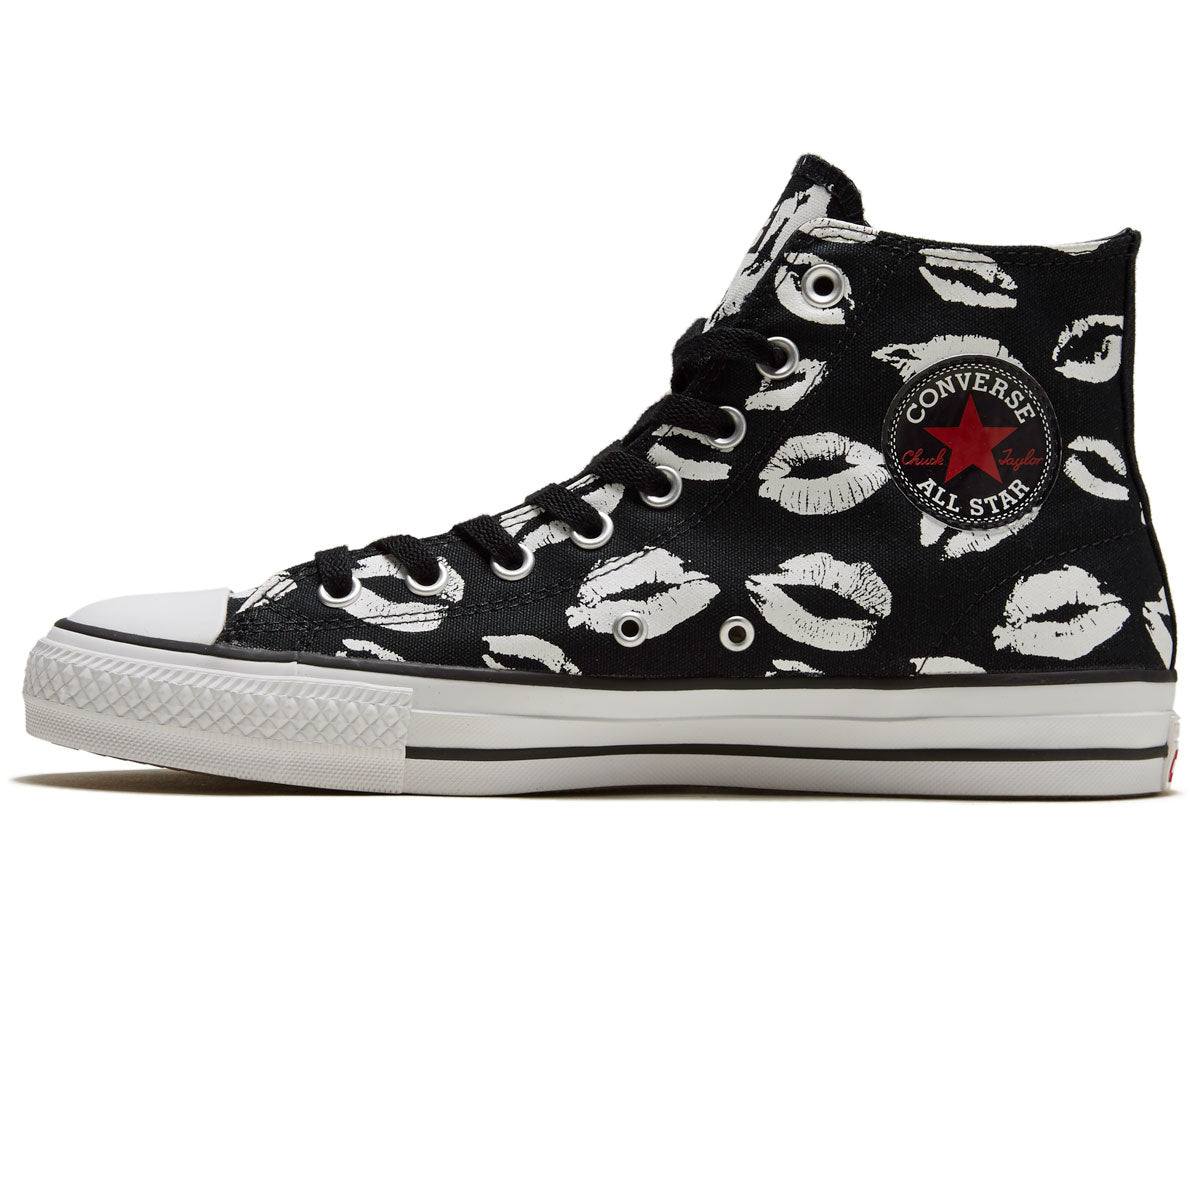 Taylor All Star Pro Lips Shoes - Black/White/Red – CCS